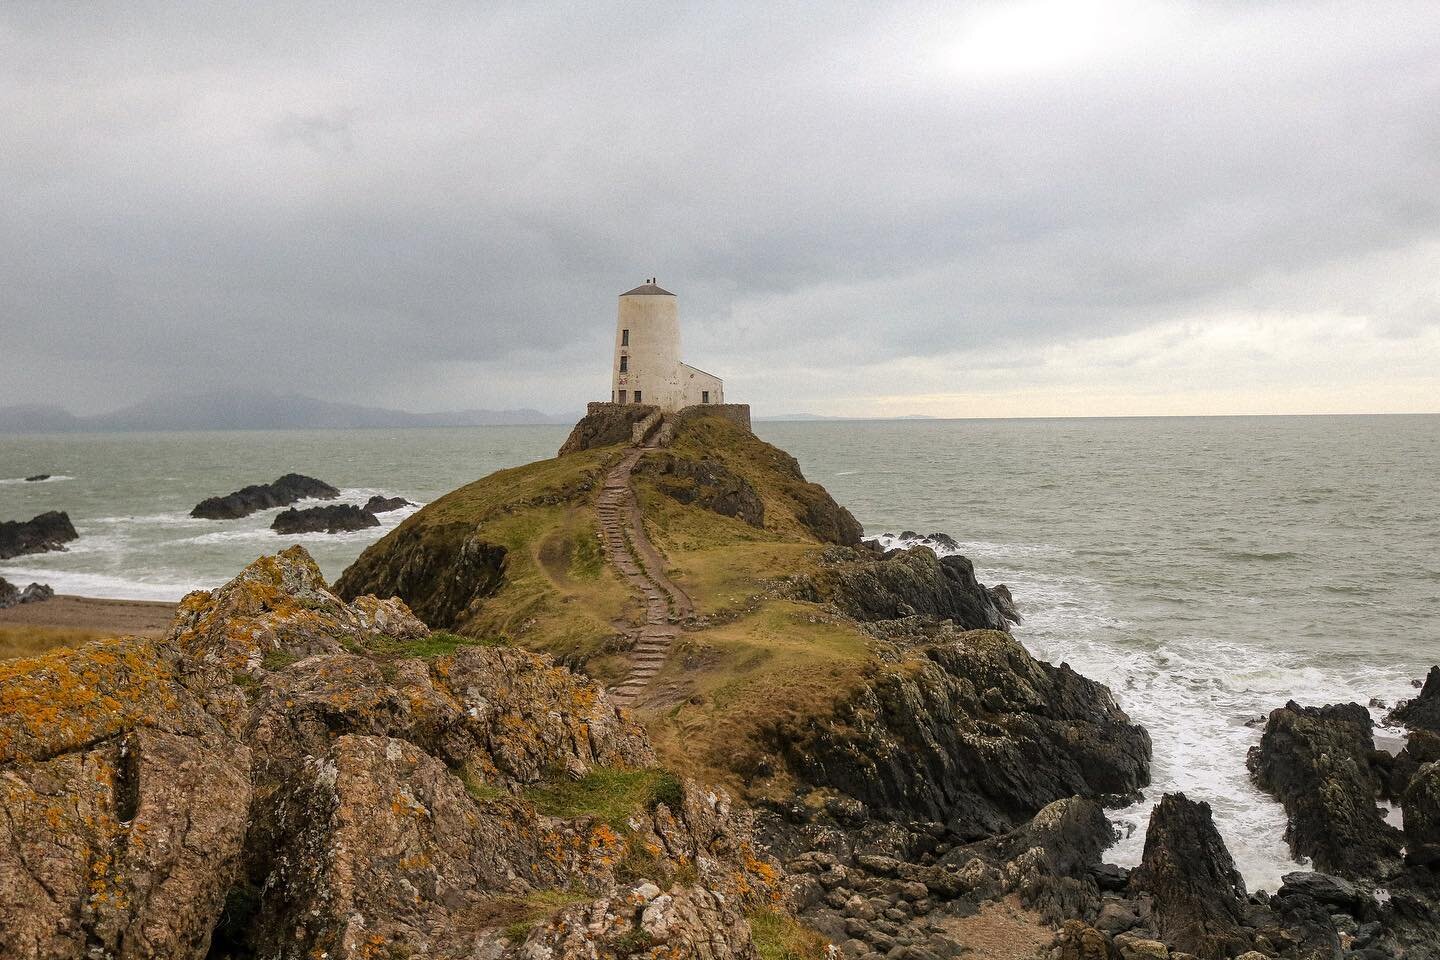 An afternoon coastal walk in Anglesey, Wales to see the Twr Mawr Lighthouse amidst the dramatic landscape 🤍